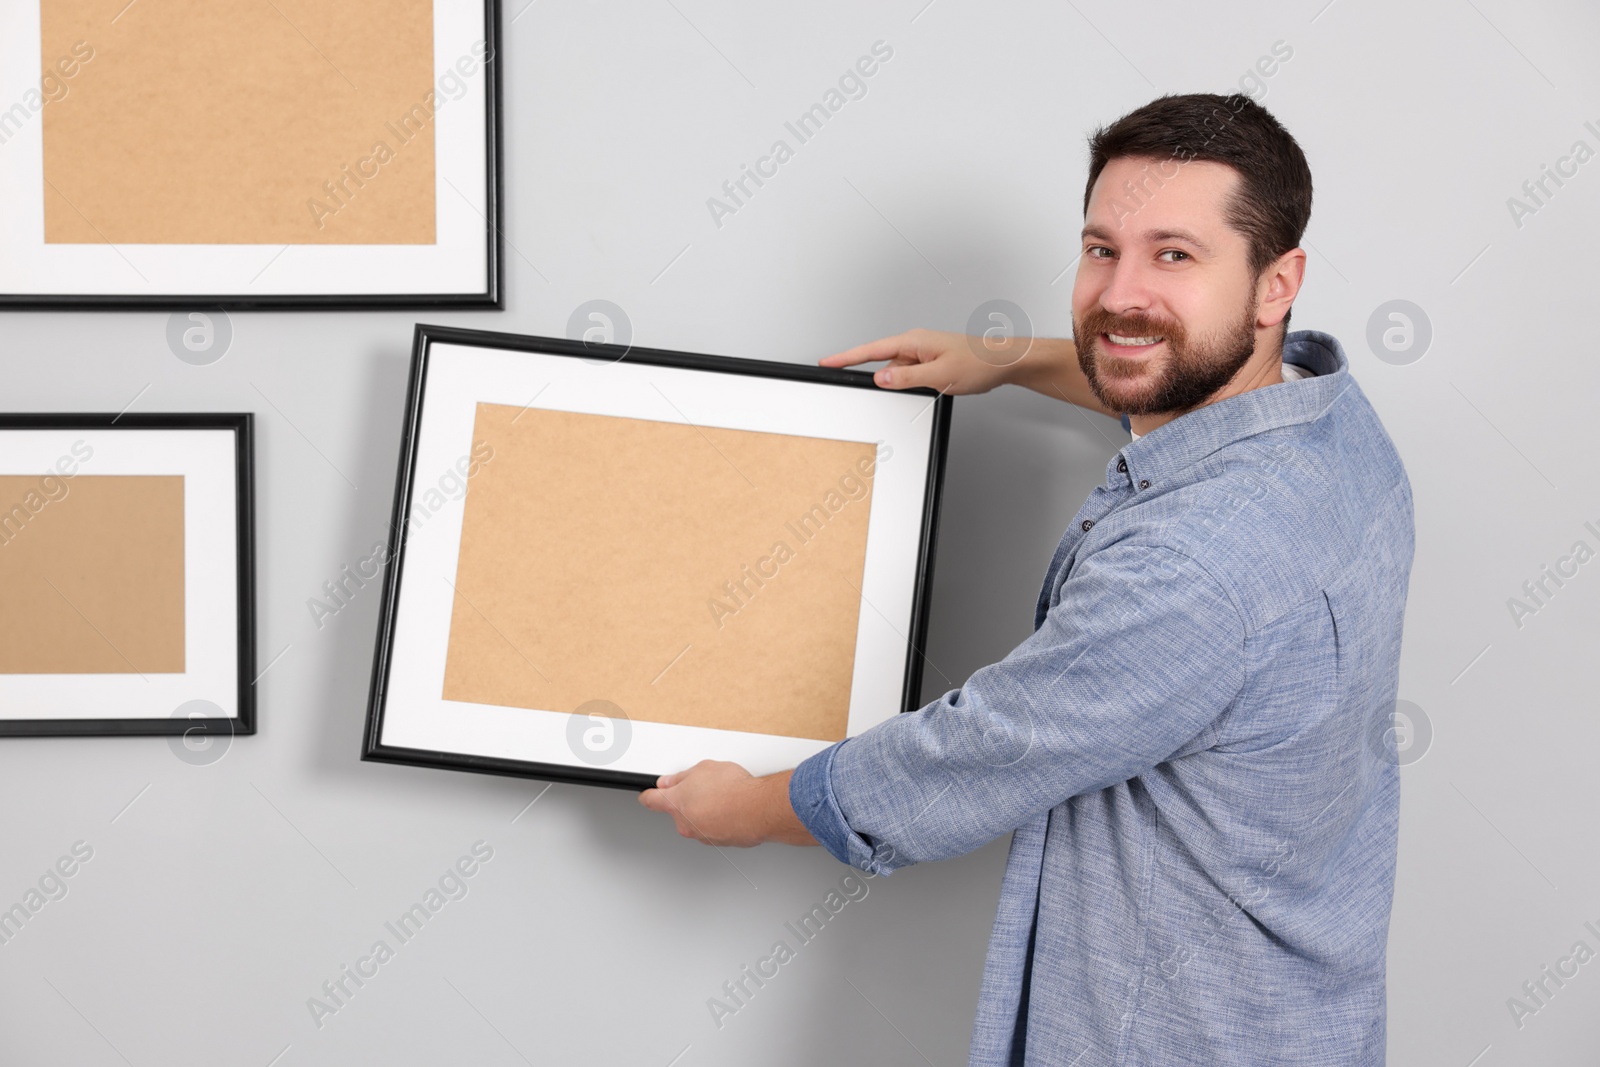 Photo of Man hanging picture frame on gray wall